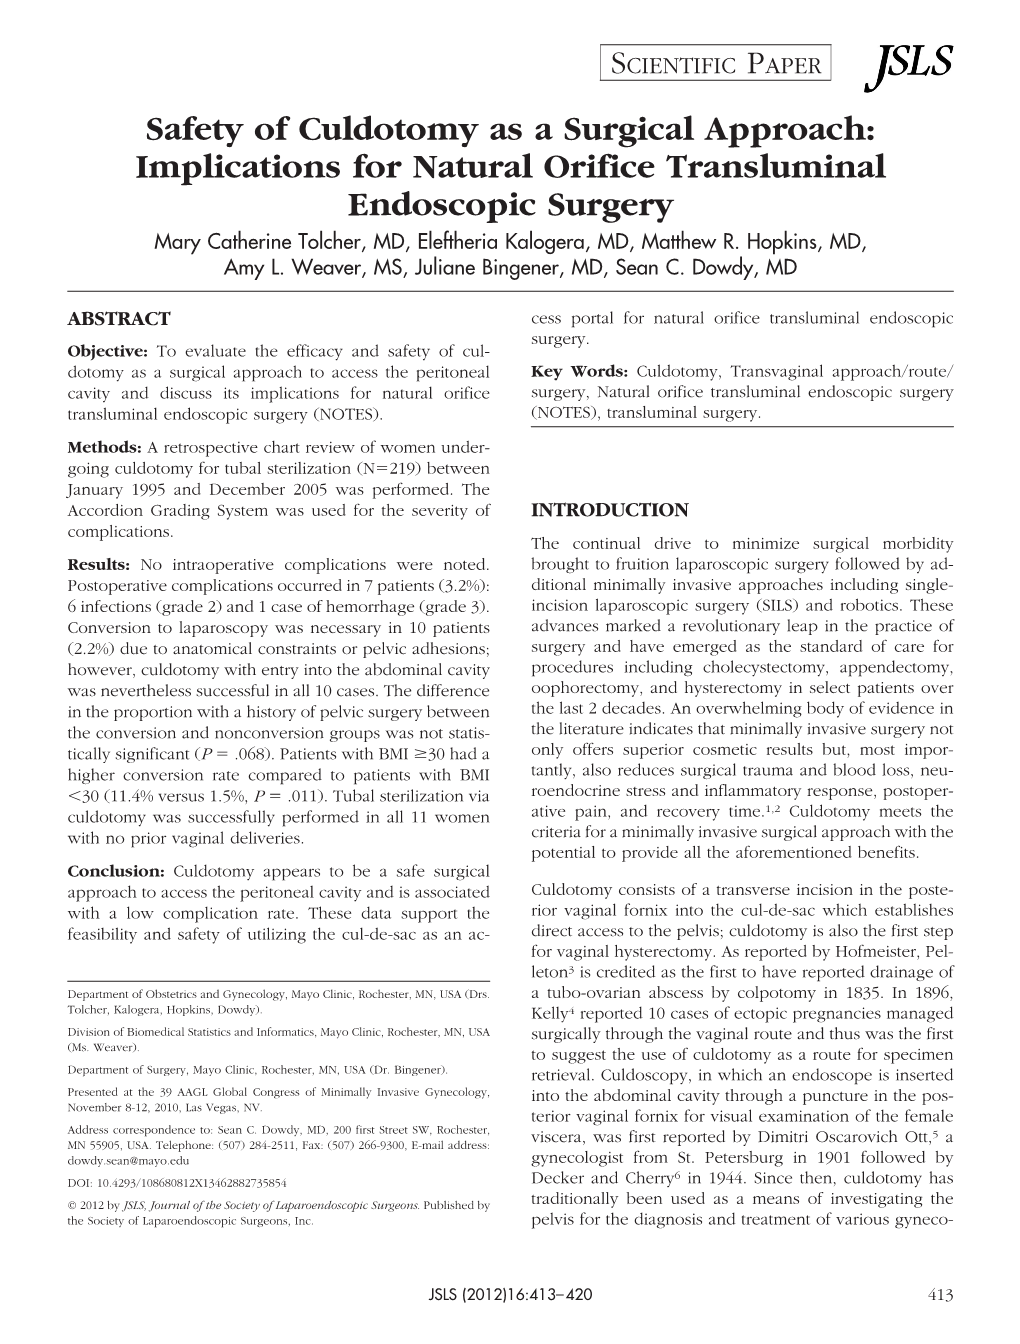 Safety of Culdotomy As a Surgical Approach: Implications for Natural Orifice Transluminal Endoscopic Surgery